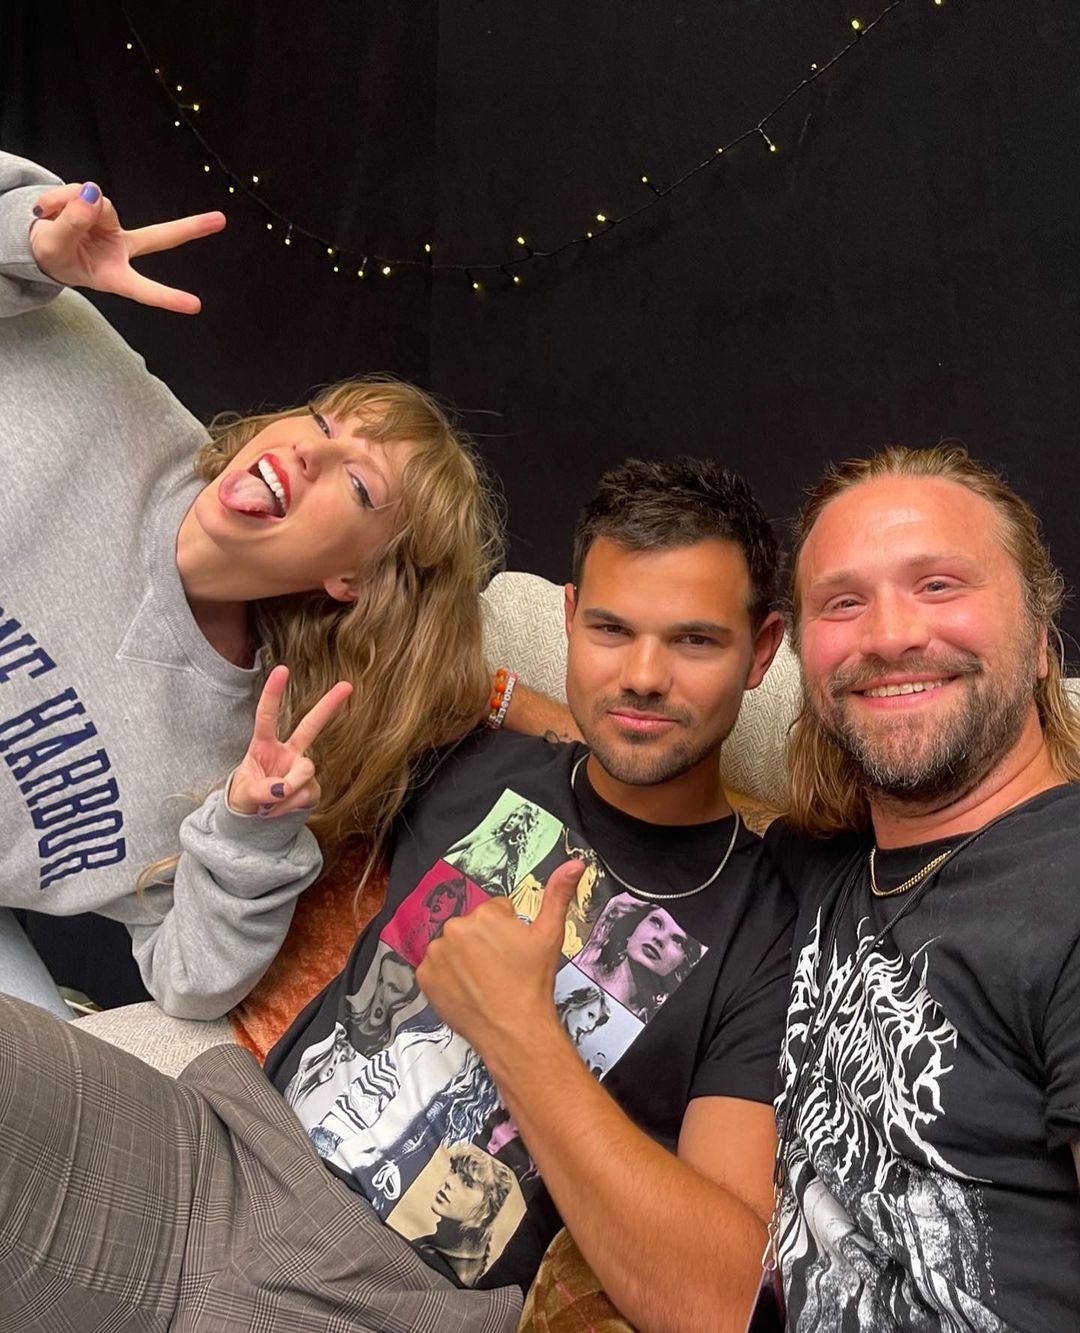 For the fans, witnessing Taylor Swift and her talented friends united is nothing short of magical. 